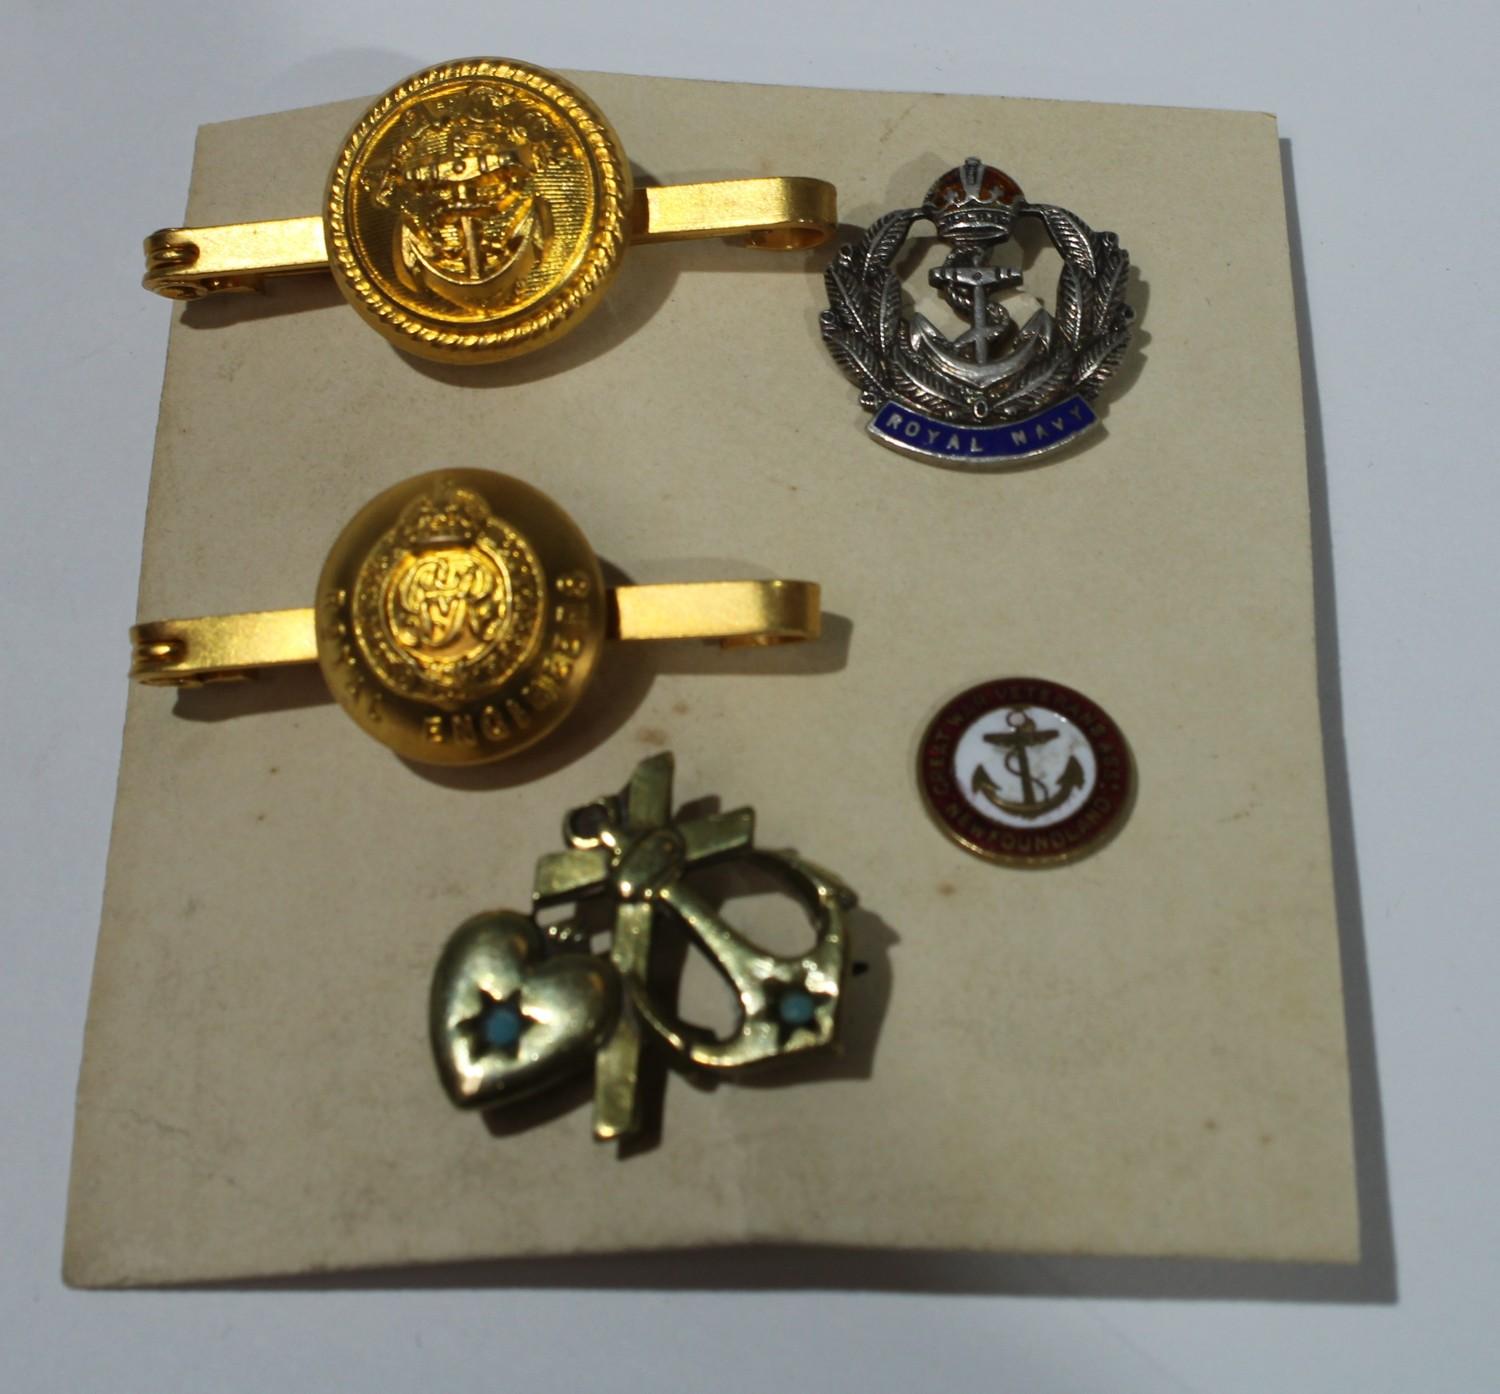 A Sterling silver and enamel Royal Navy badge; an anchor and heart badge; Great War Newfoundland